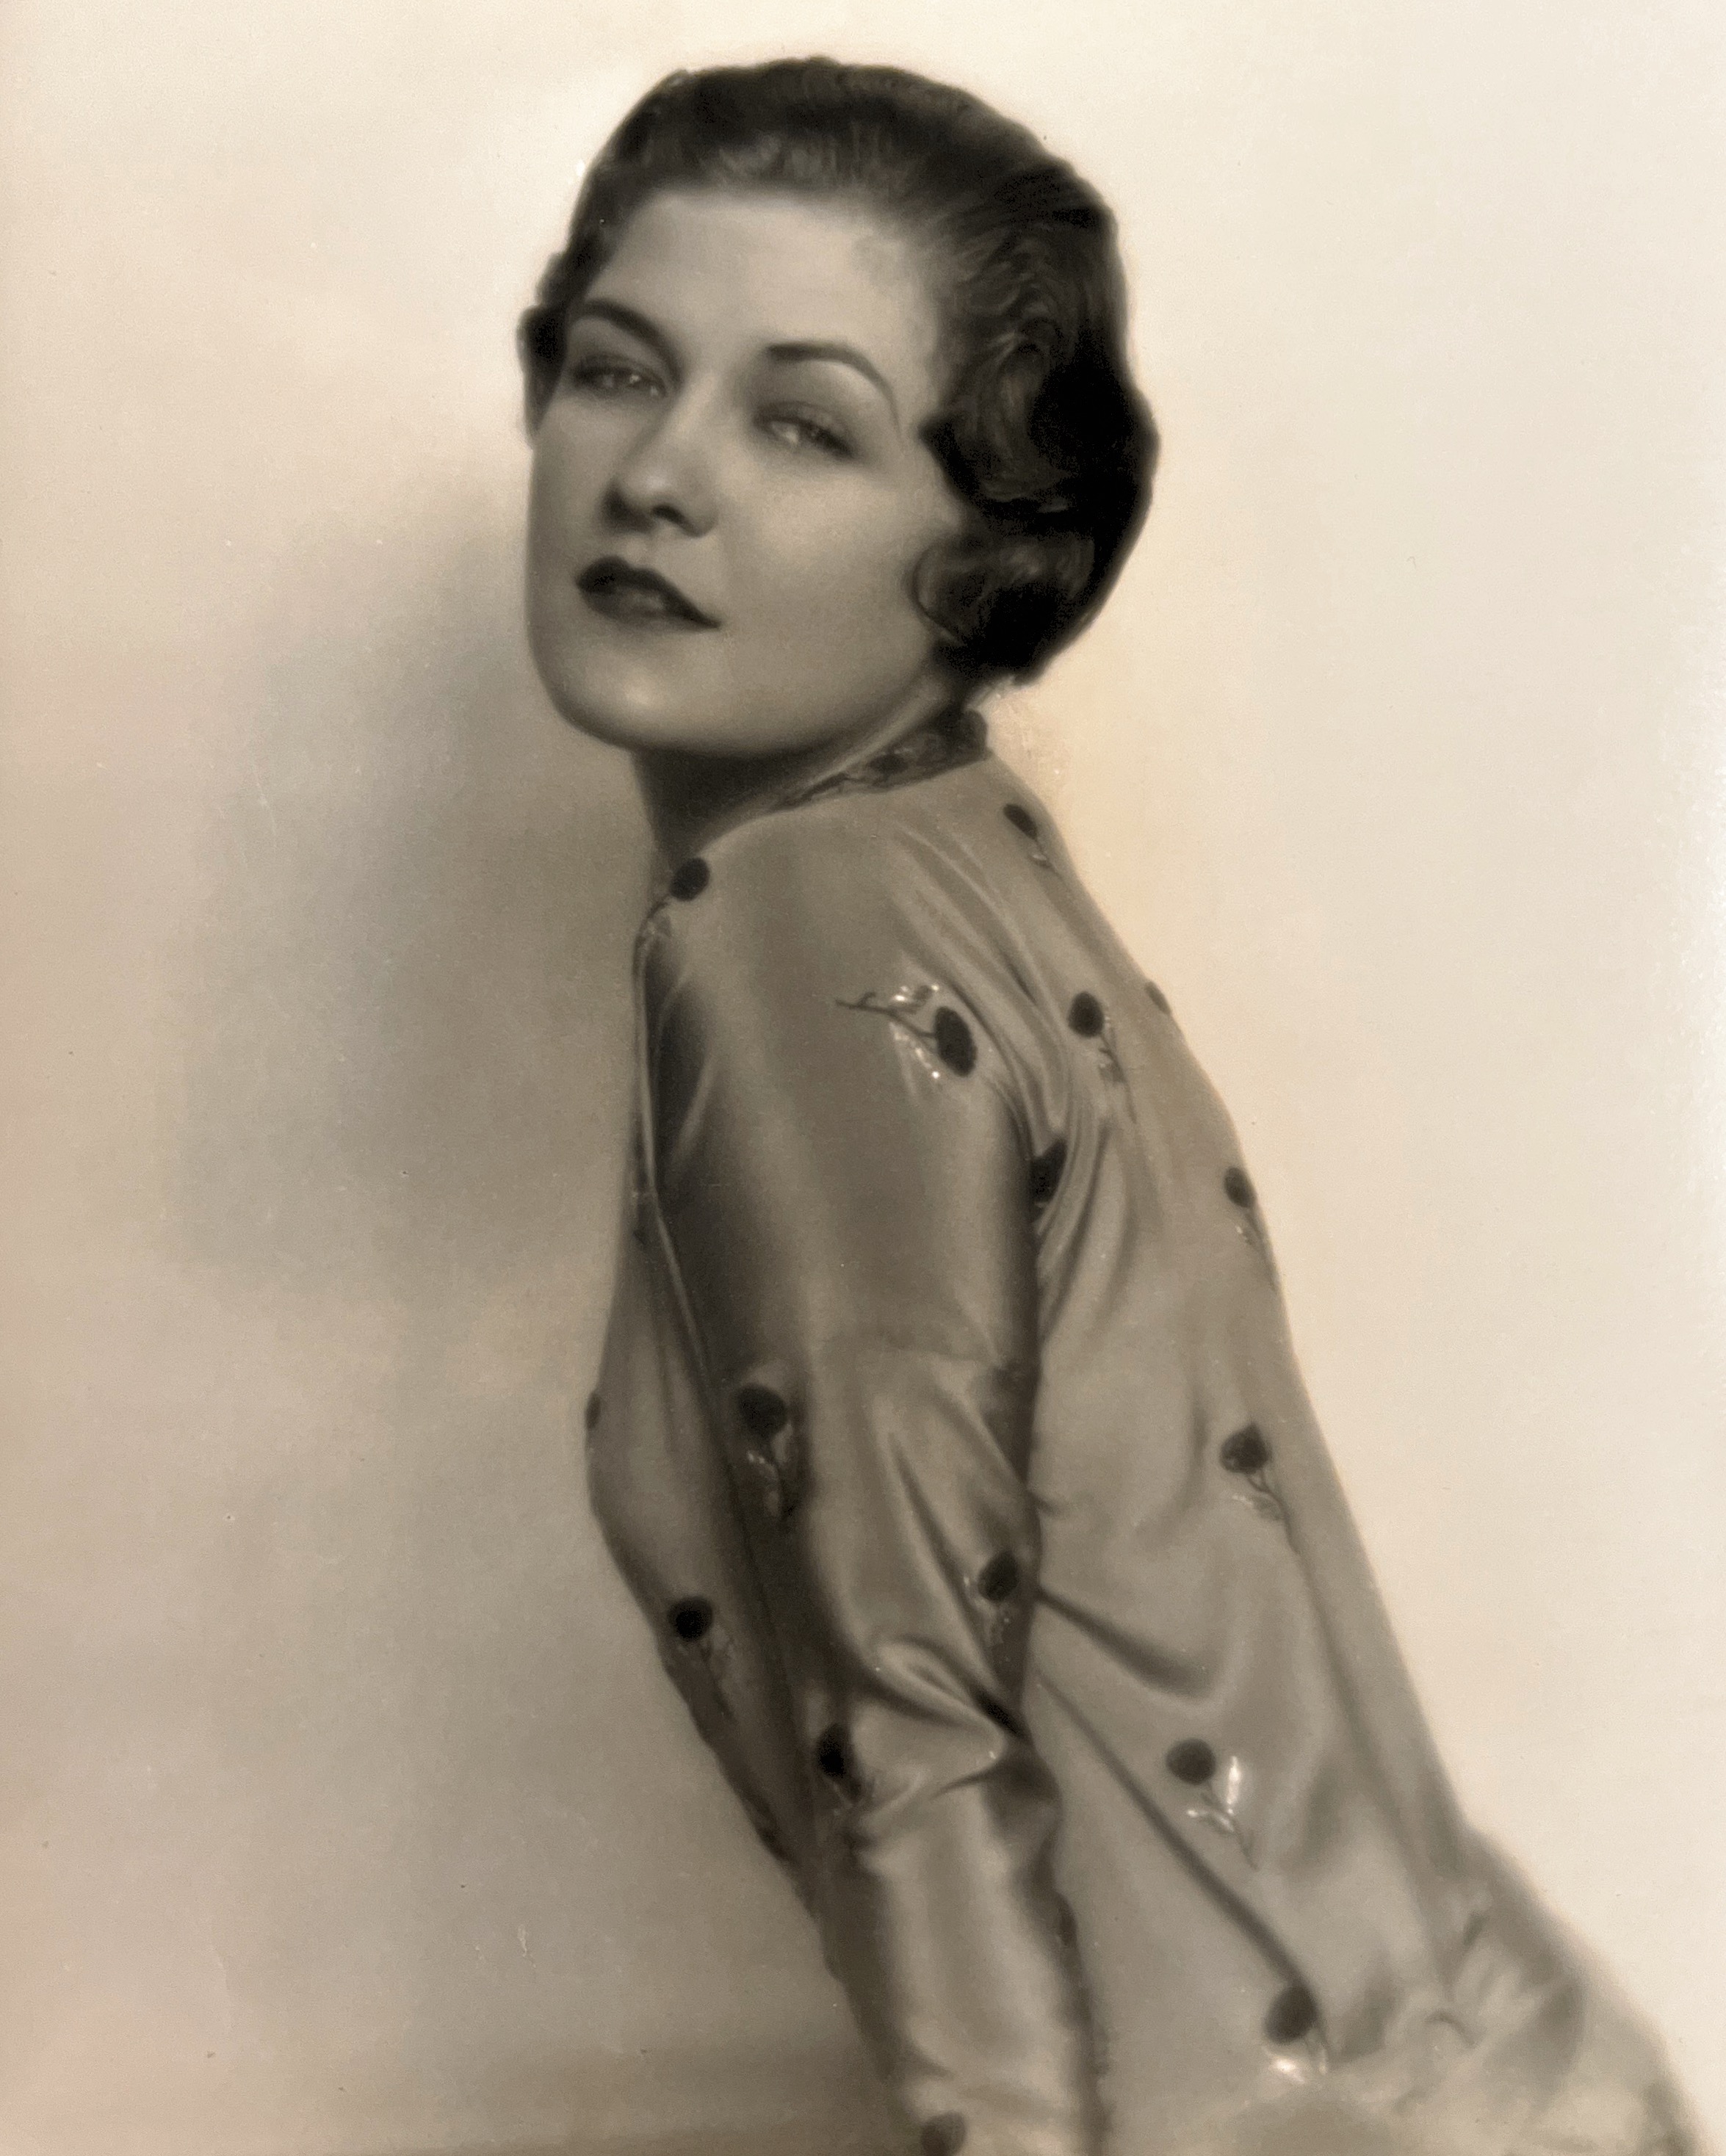 Laura La Plante photographed by Russell Ball in 1929.